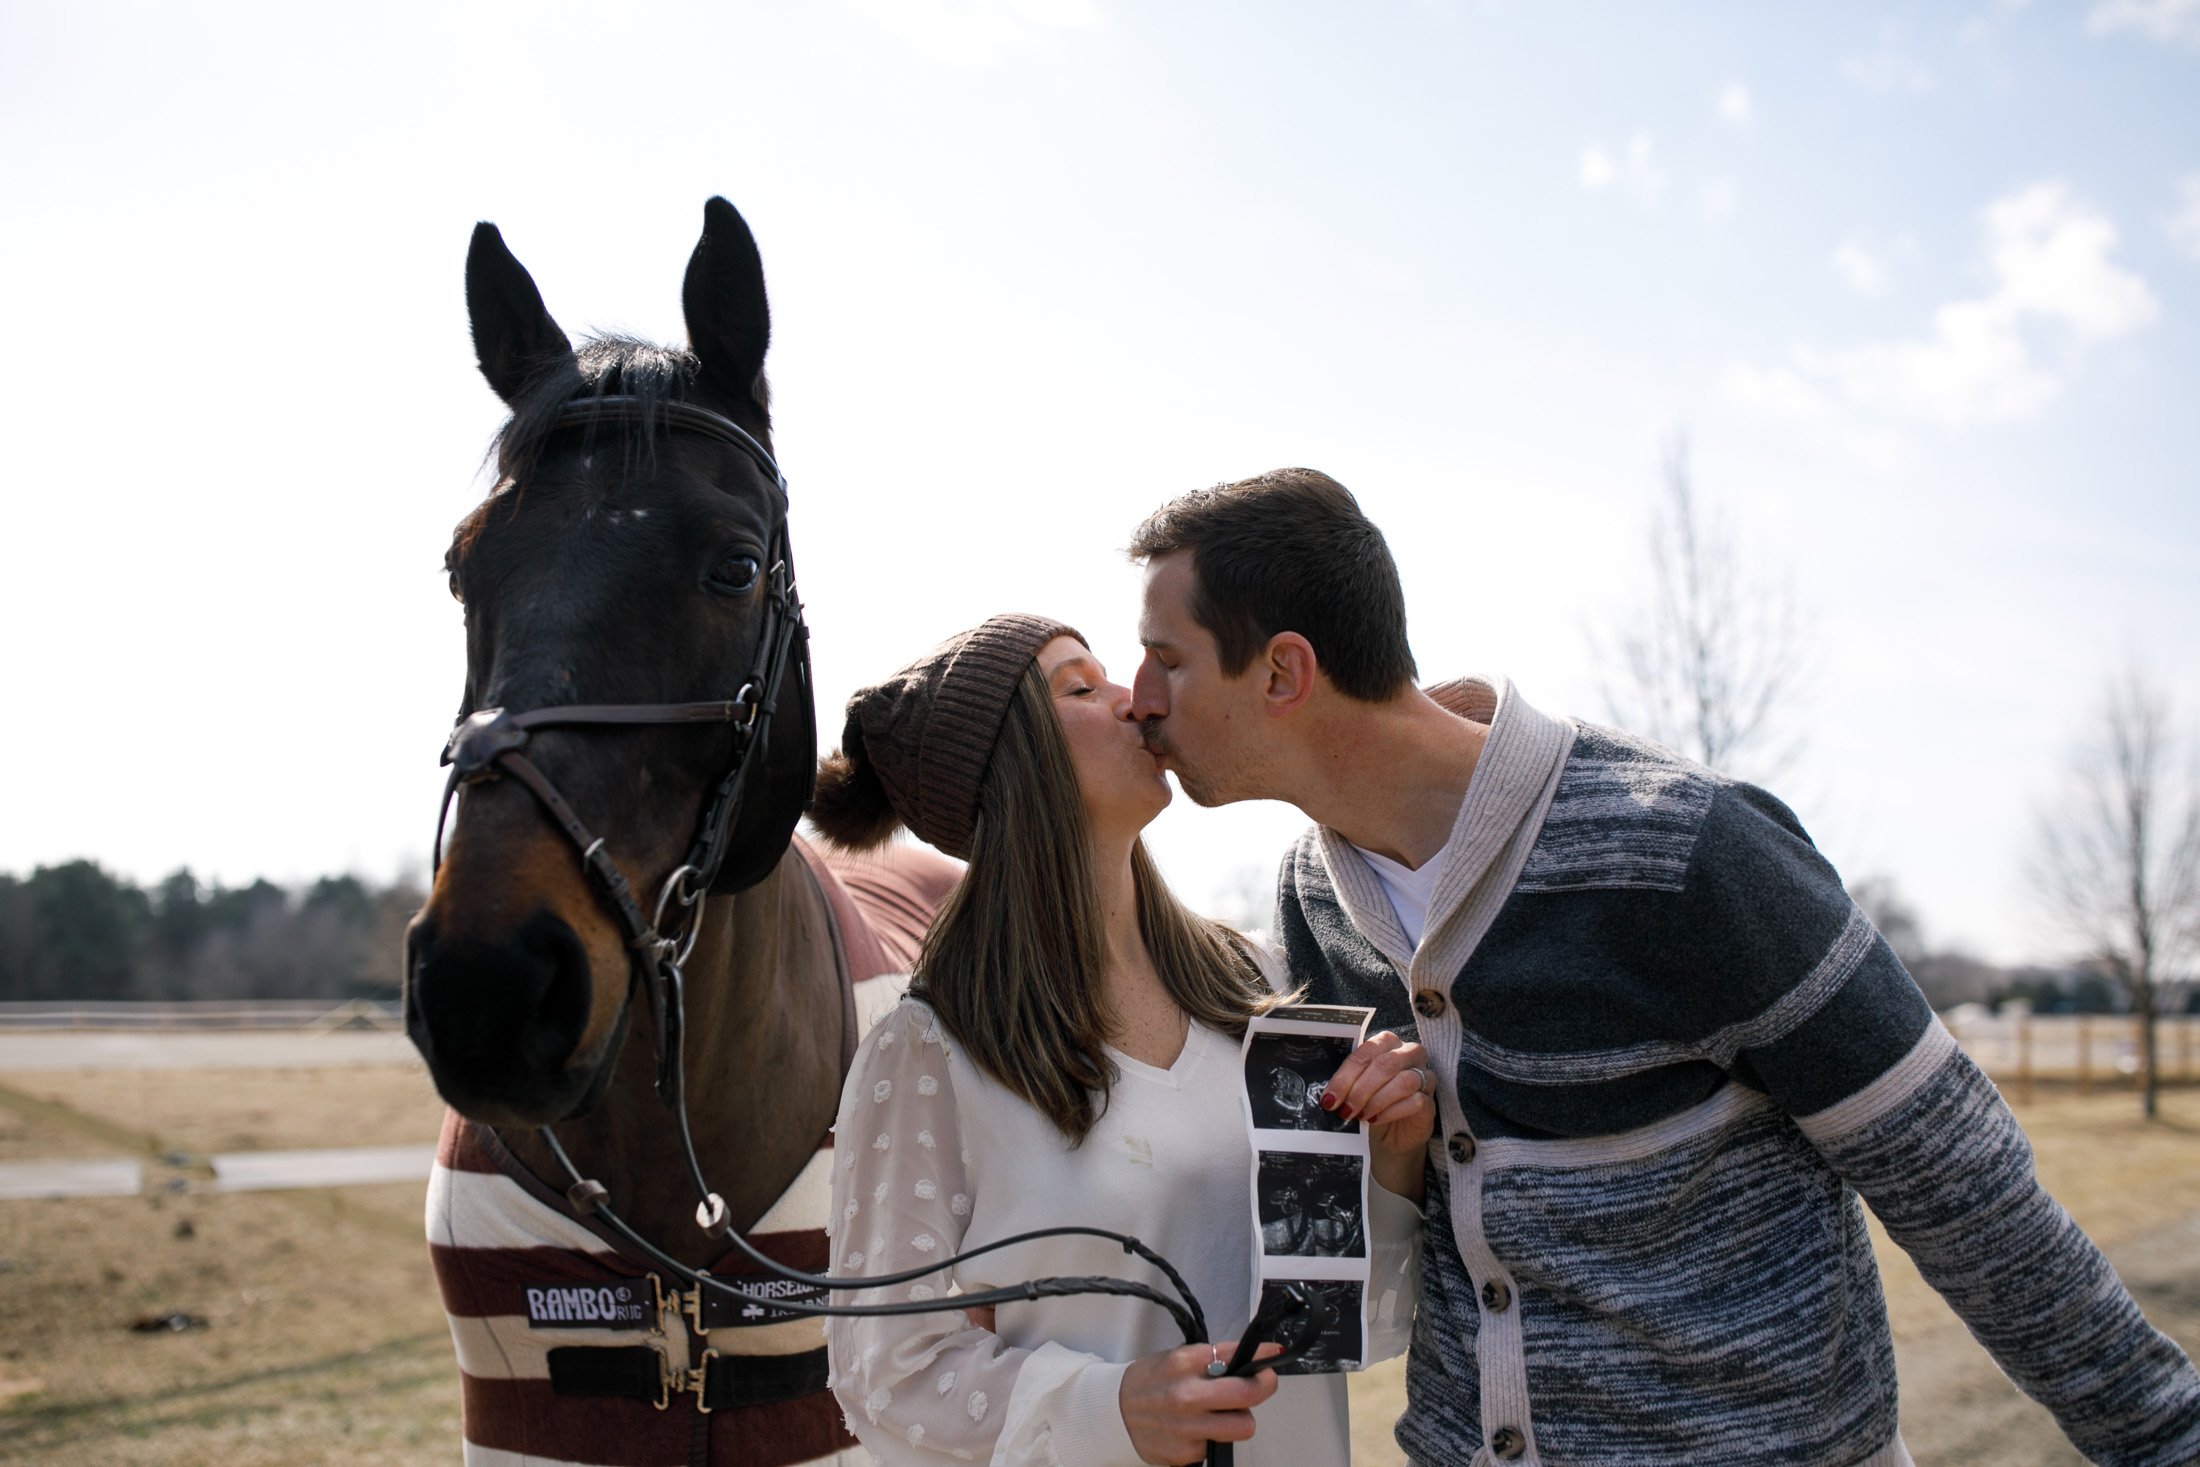 George and Kelsey Pregnancy Announcement - Grand Haven Family Photographer - Black Diamond Equestrian - Nunica Family Photogrpaher - Maternity Session - Pregnancy Announcement - Spring Lake Family Photographer - J Darling Photo_015.jpg